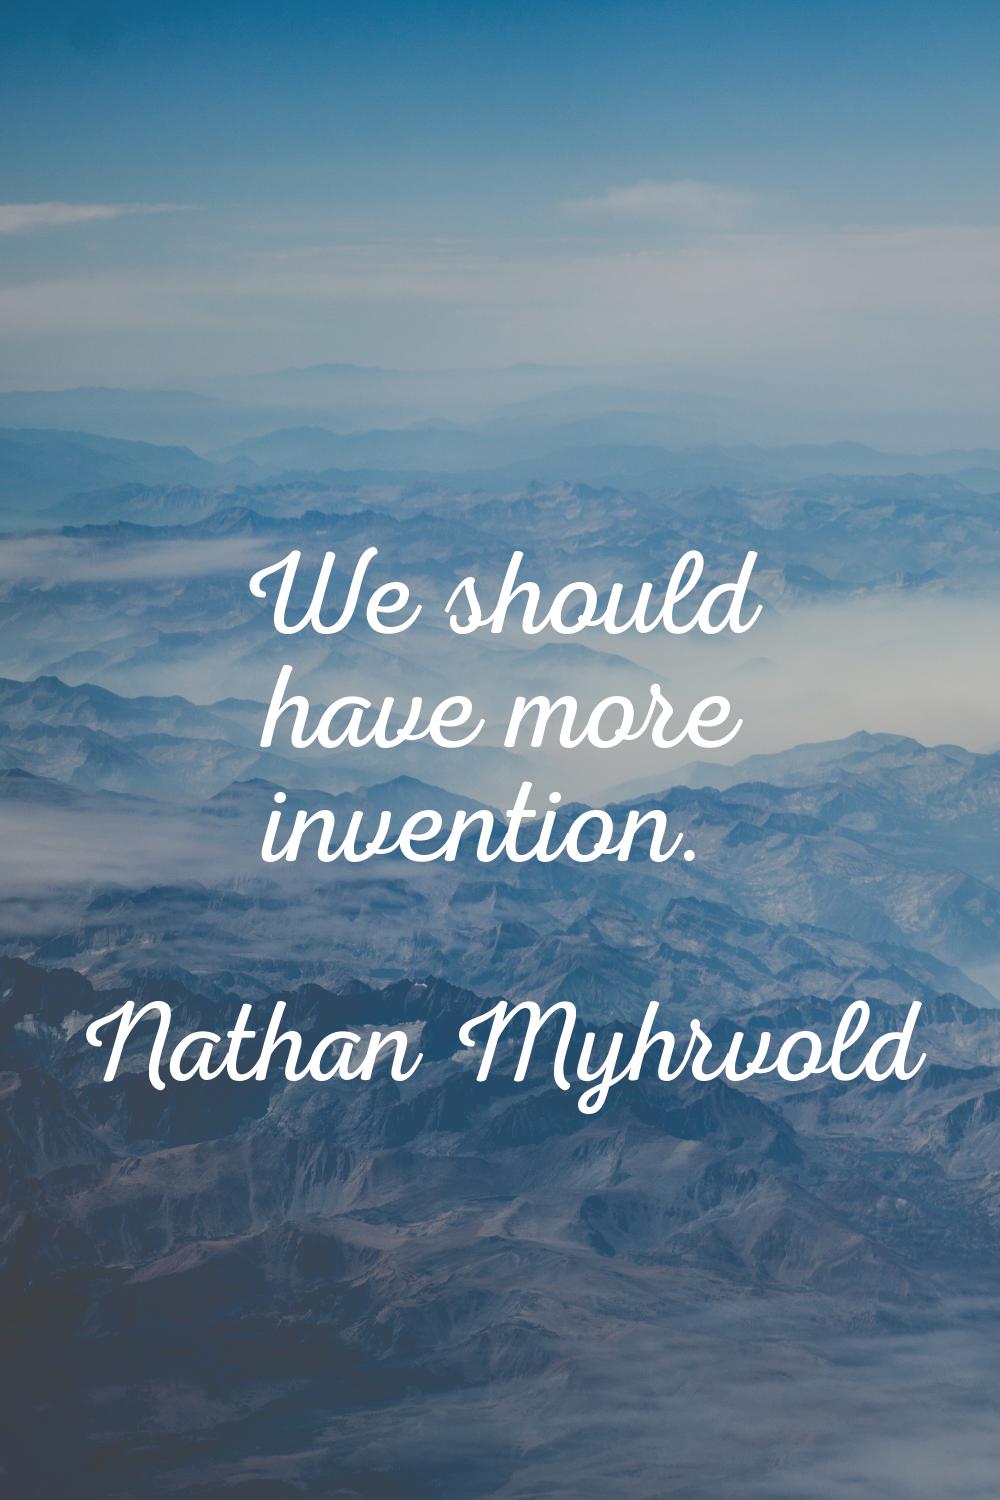 We should have more invention.